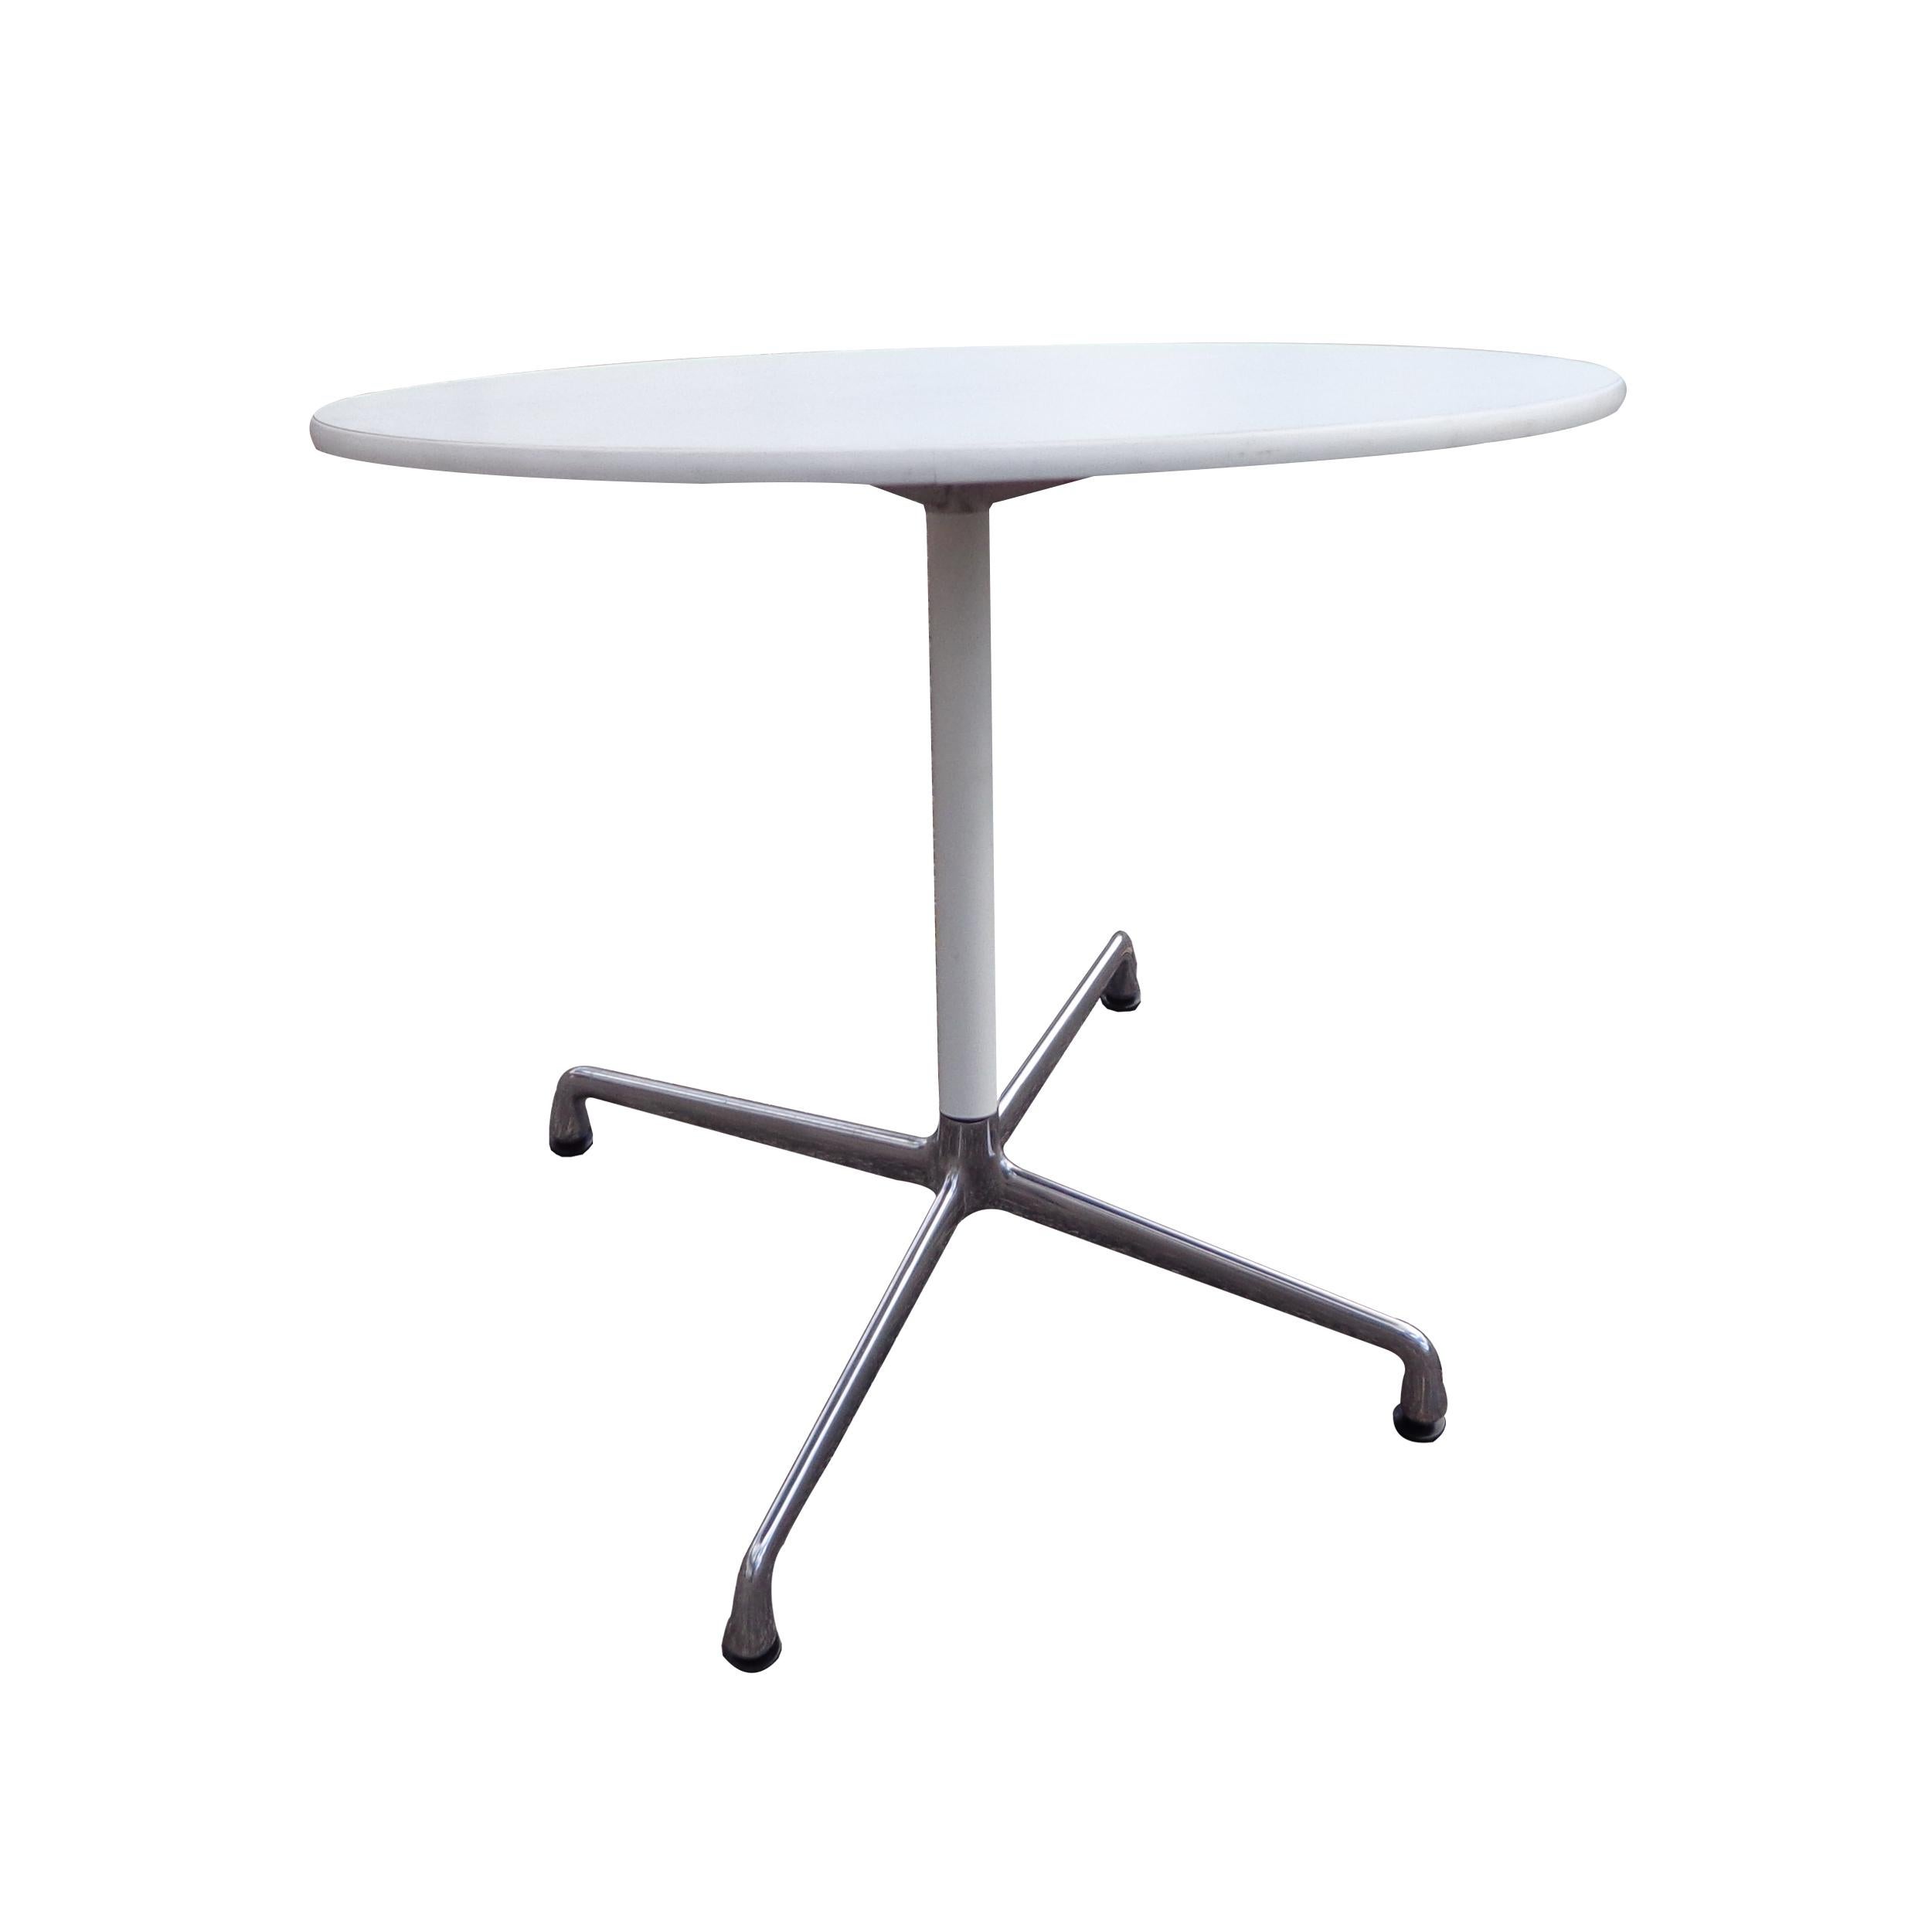 North American Charles Eames for Herman Miller Dining Table For Sale